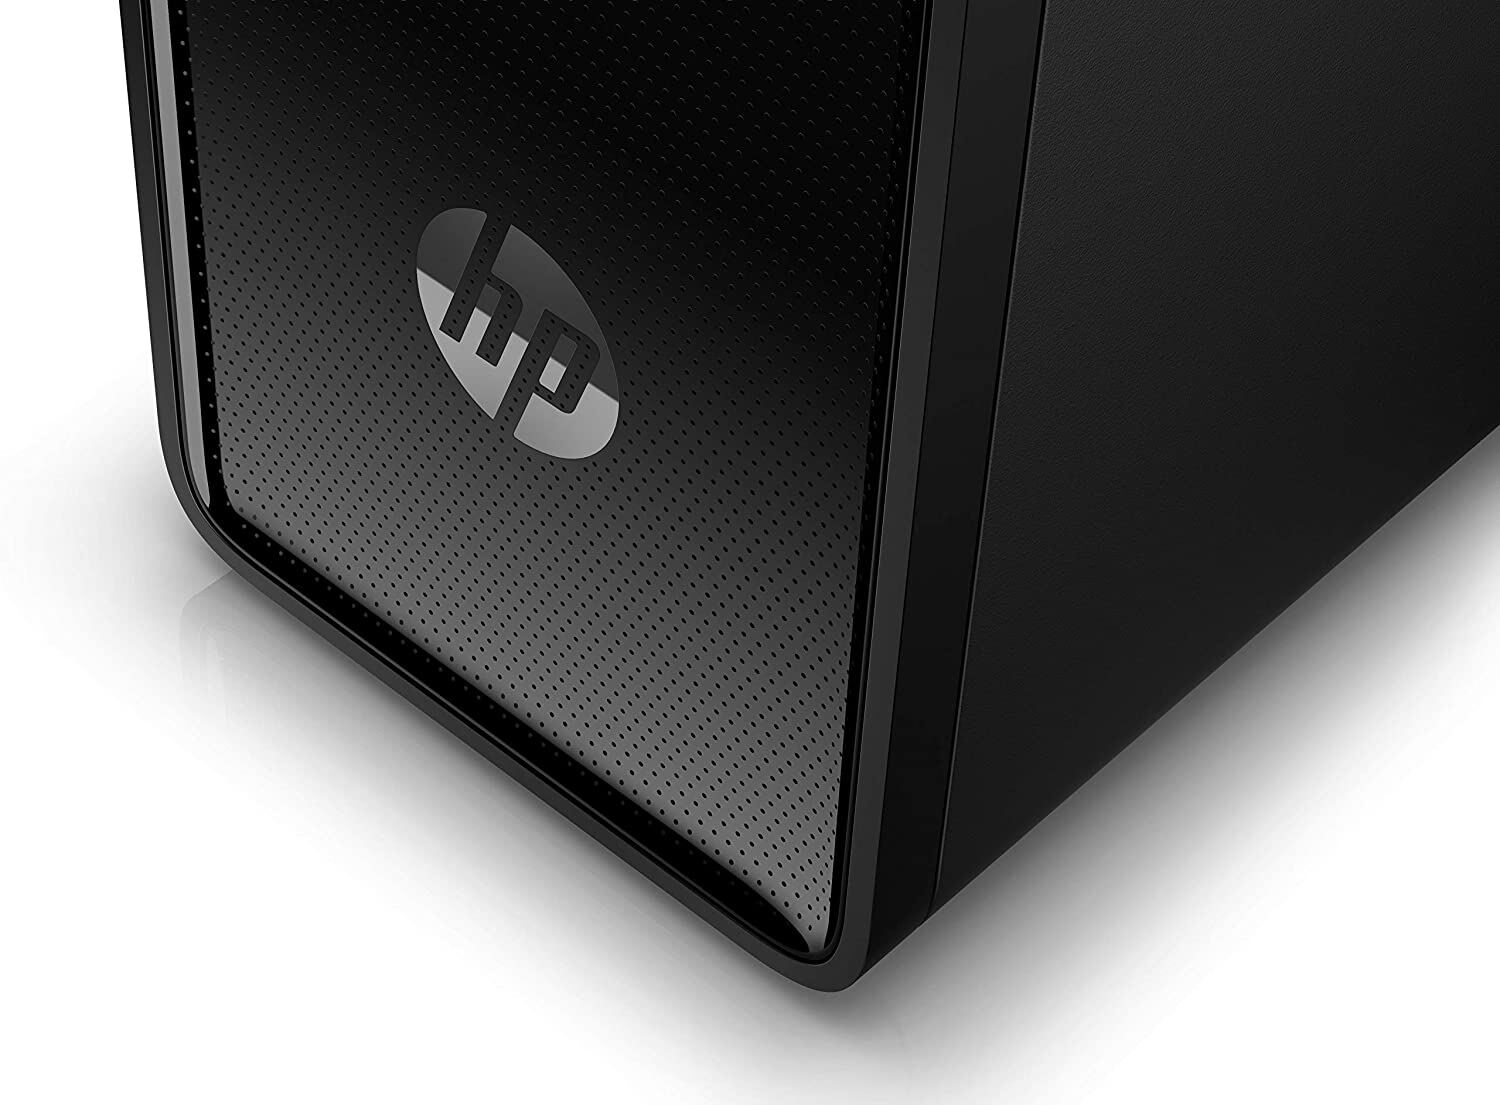 HP Desktop 290-A0007IL with Celeron- J4005 processor 4GB RAM, 1TB Hard Drive, DVD and DOS OS with LED Monitor 19.5 inch HP 20KD-M000000000354 www.mysocially.com